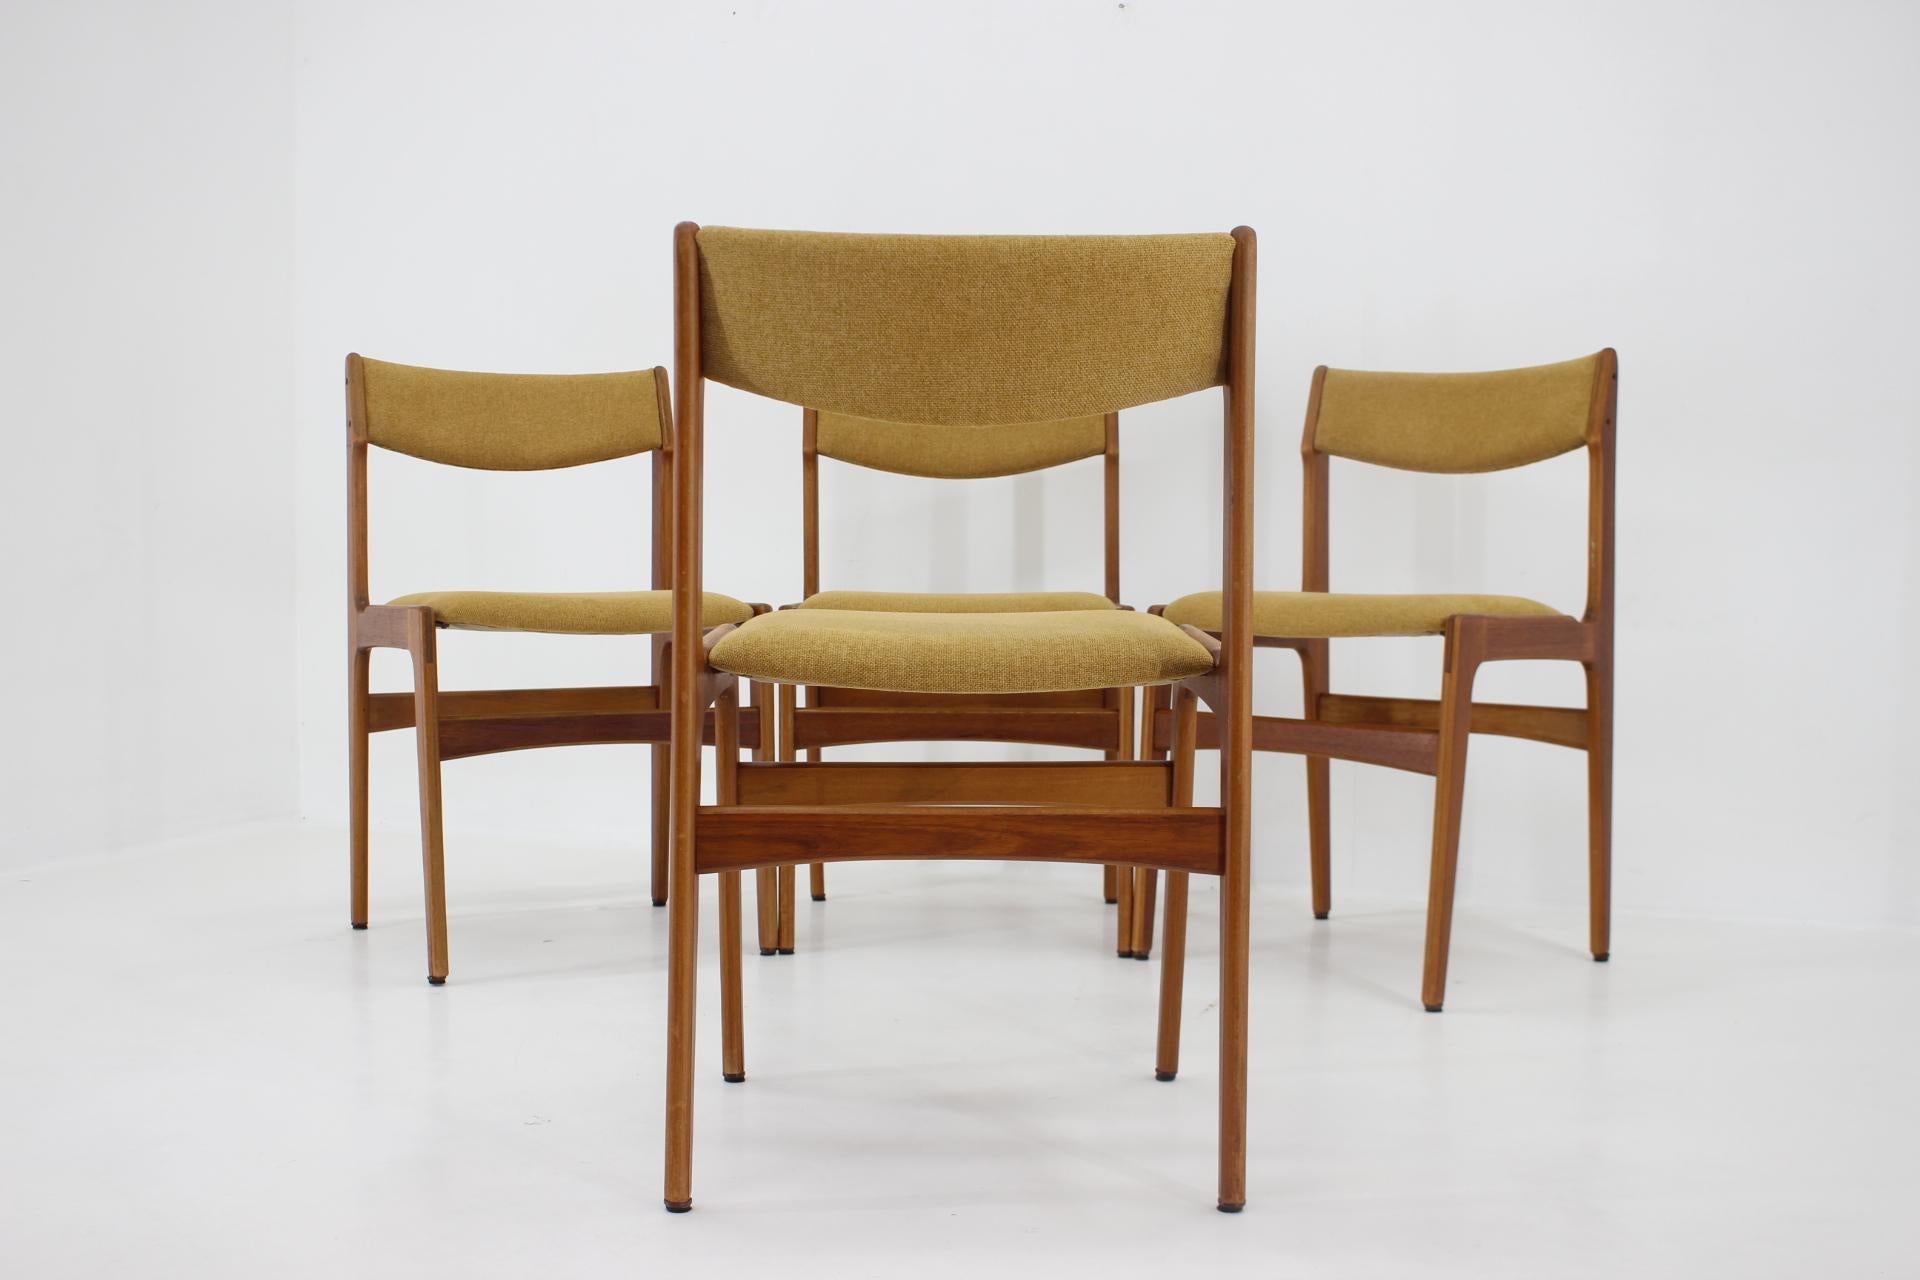 Fabric 1960s Set of Four Teak Dining Chairs, Denmark